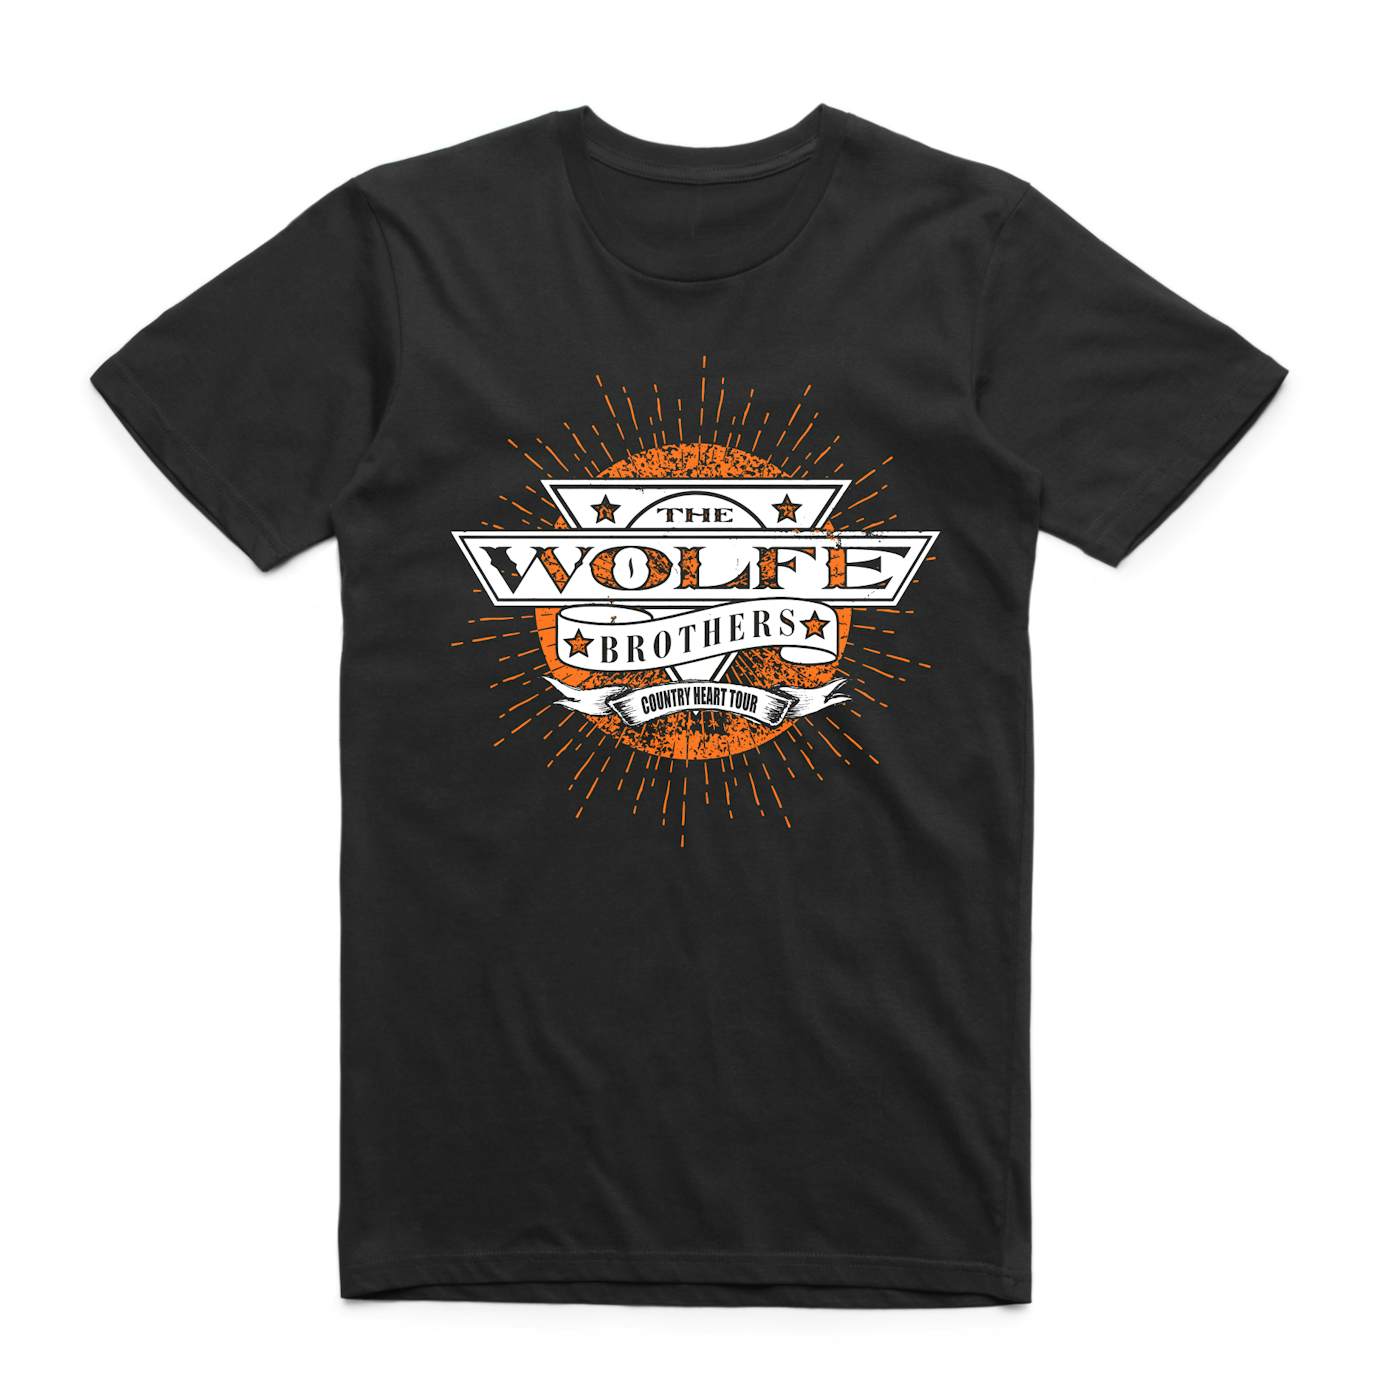 The Wolfe Brothers - Country Heart Black Tee